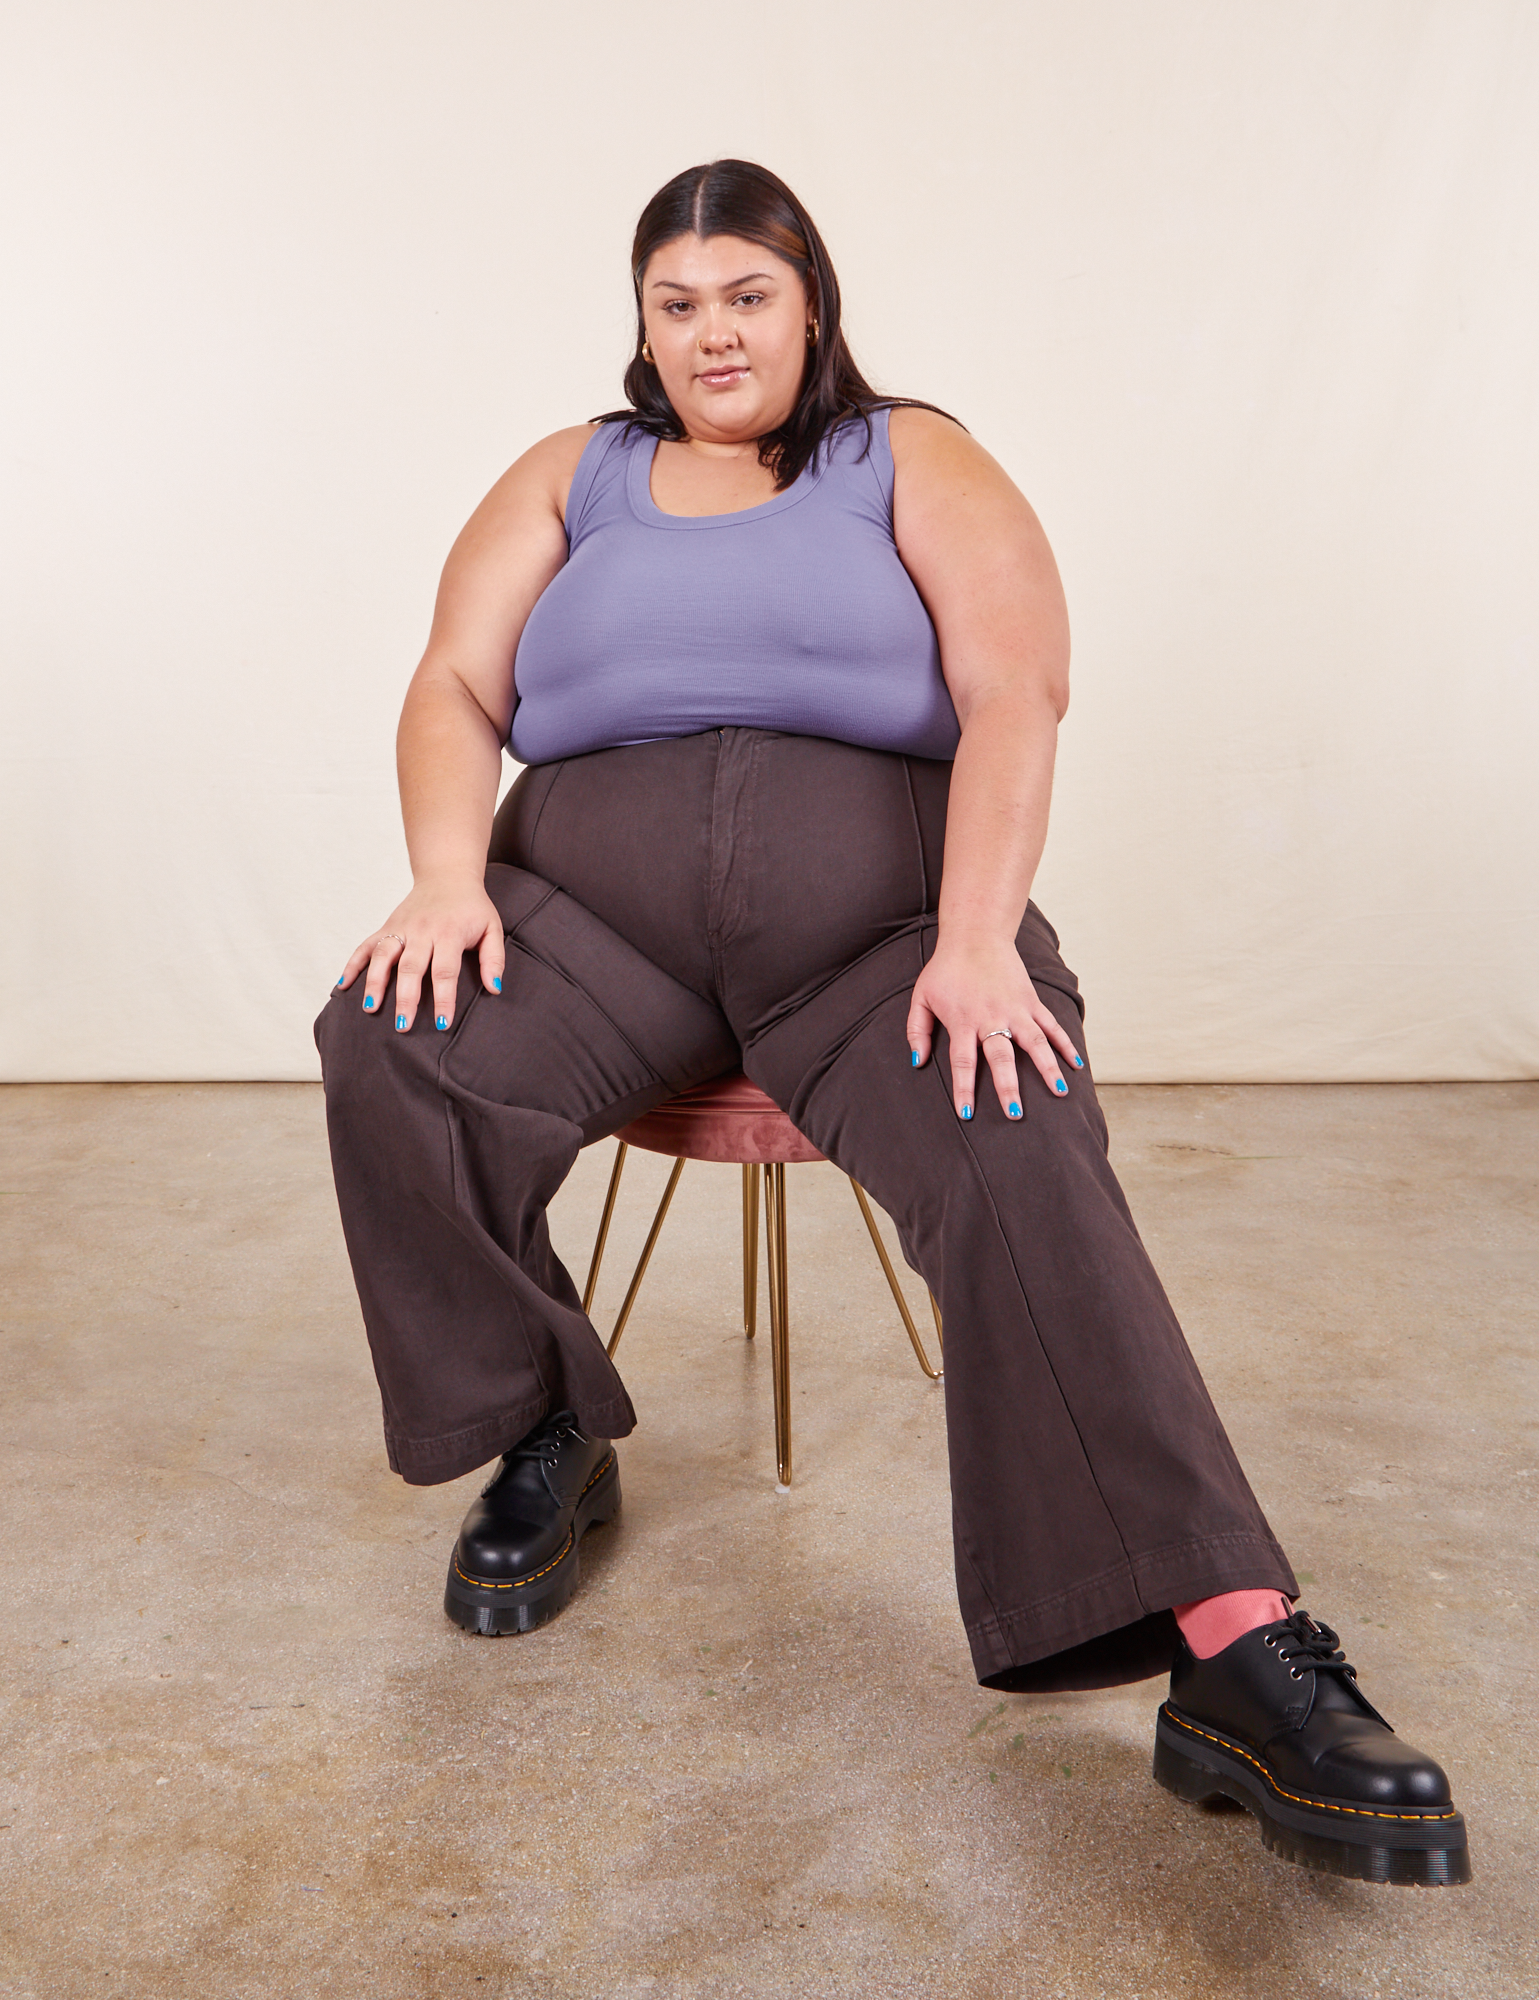 Sarita is wearing Tank Top in Faded Grape and espresso brown Western Pants